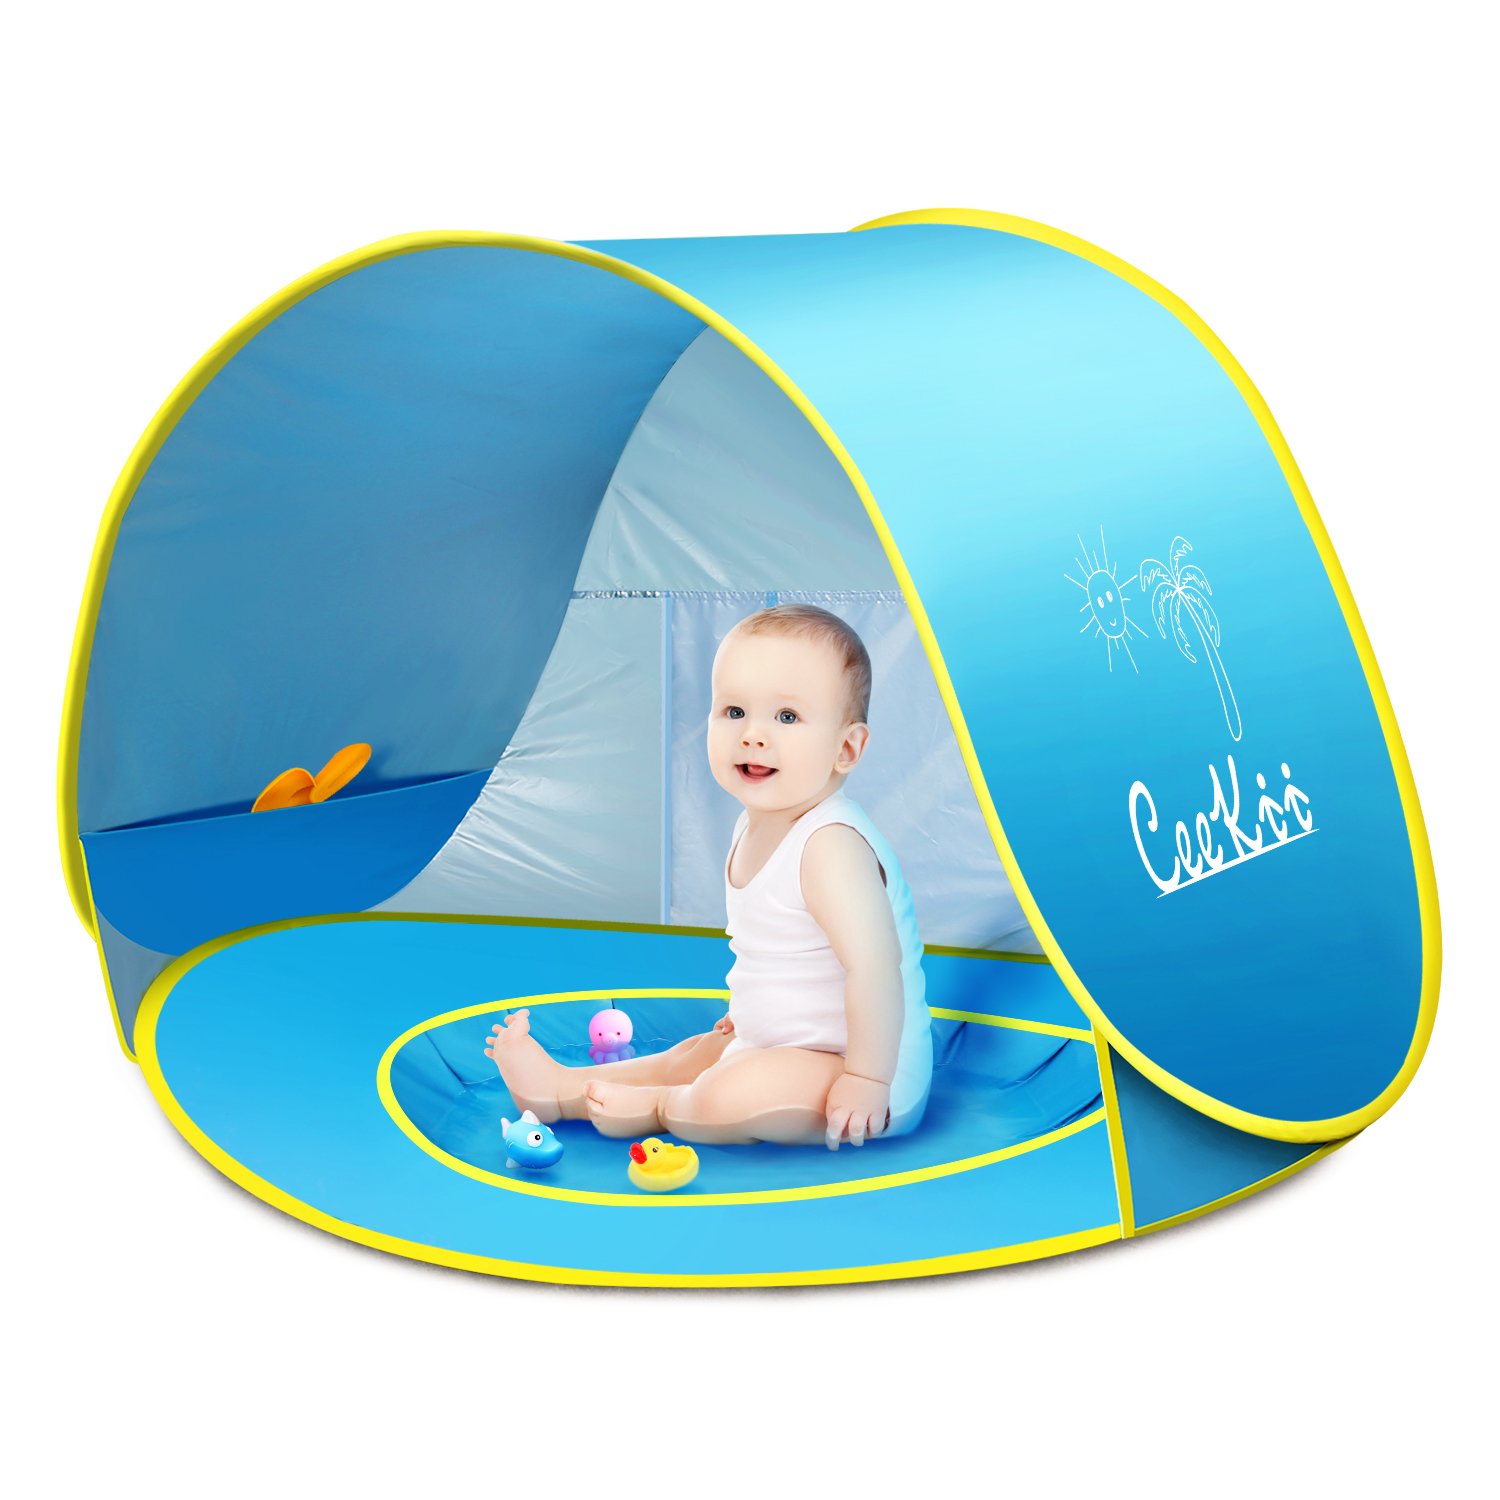 CeeKii Baby Beach Tent Pop Up Tent Portable Shade Pool UV Protection Sun Shelter with Mini Pool